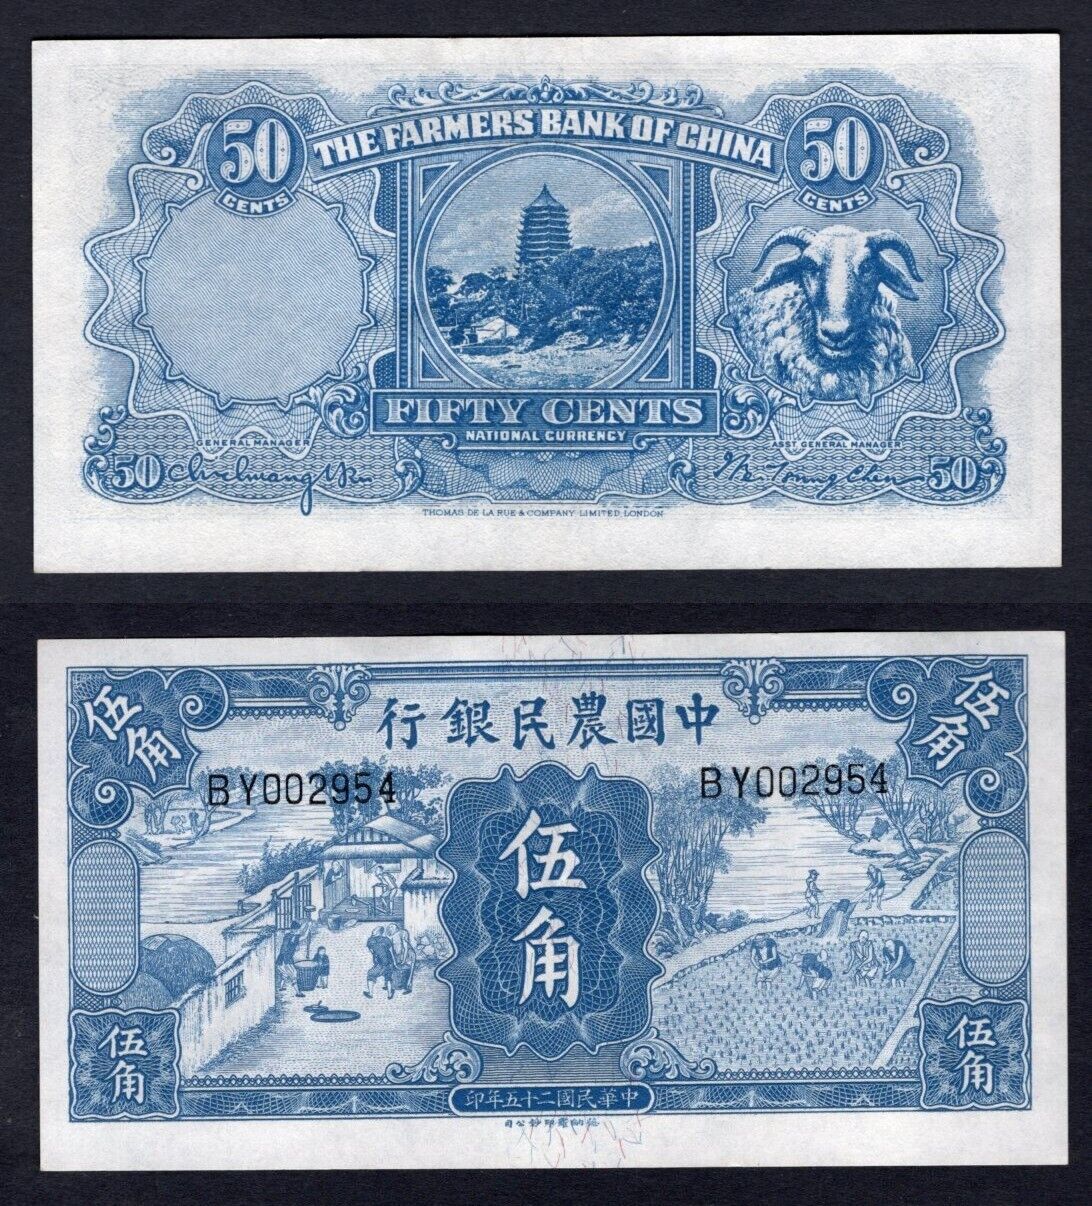 Farmers Bank of CHINA 1936 Banknote 50c Paper Money